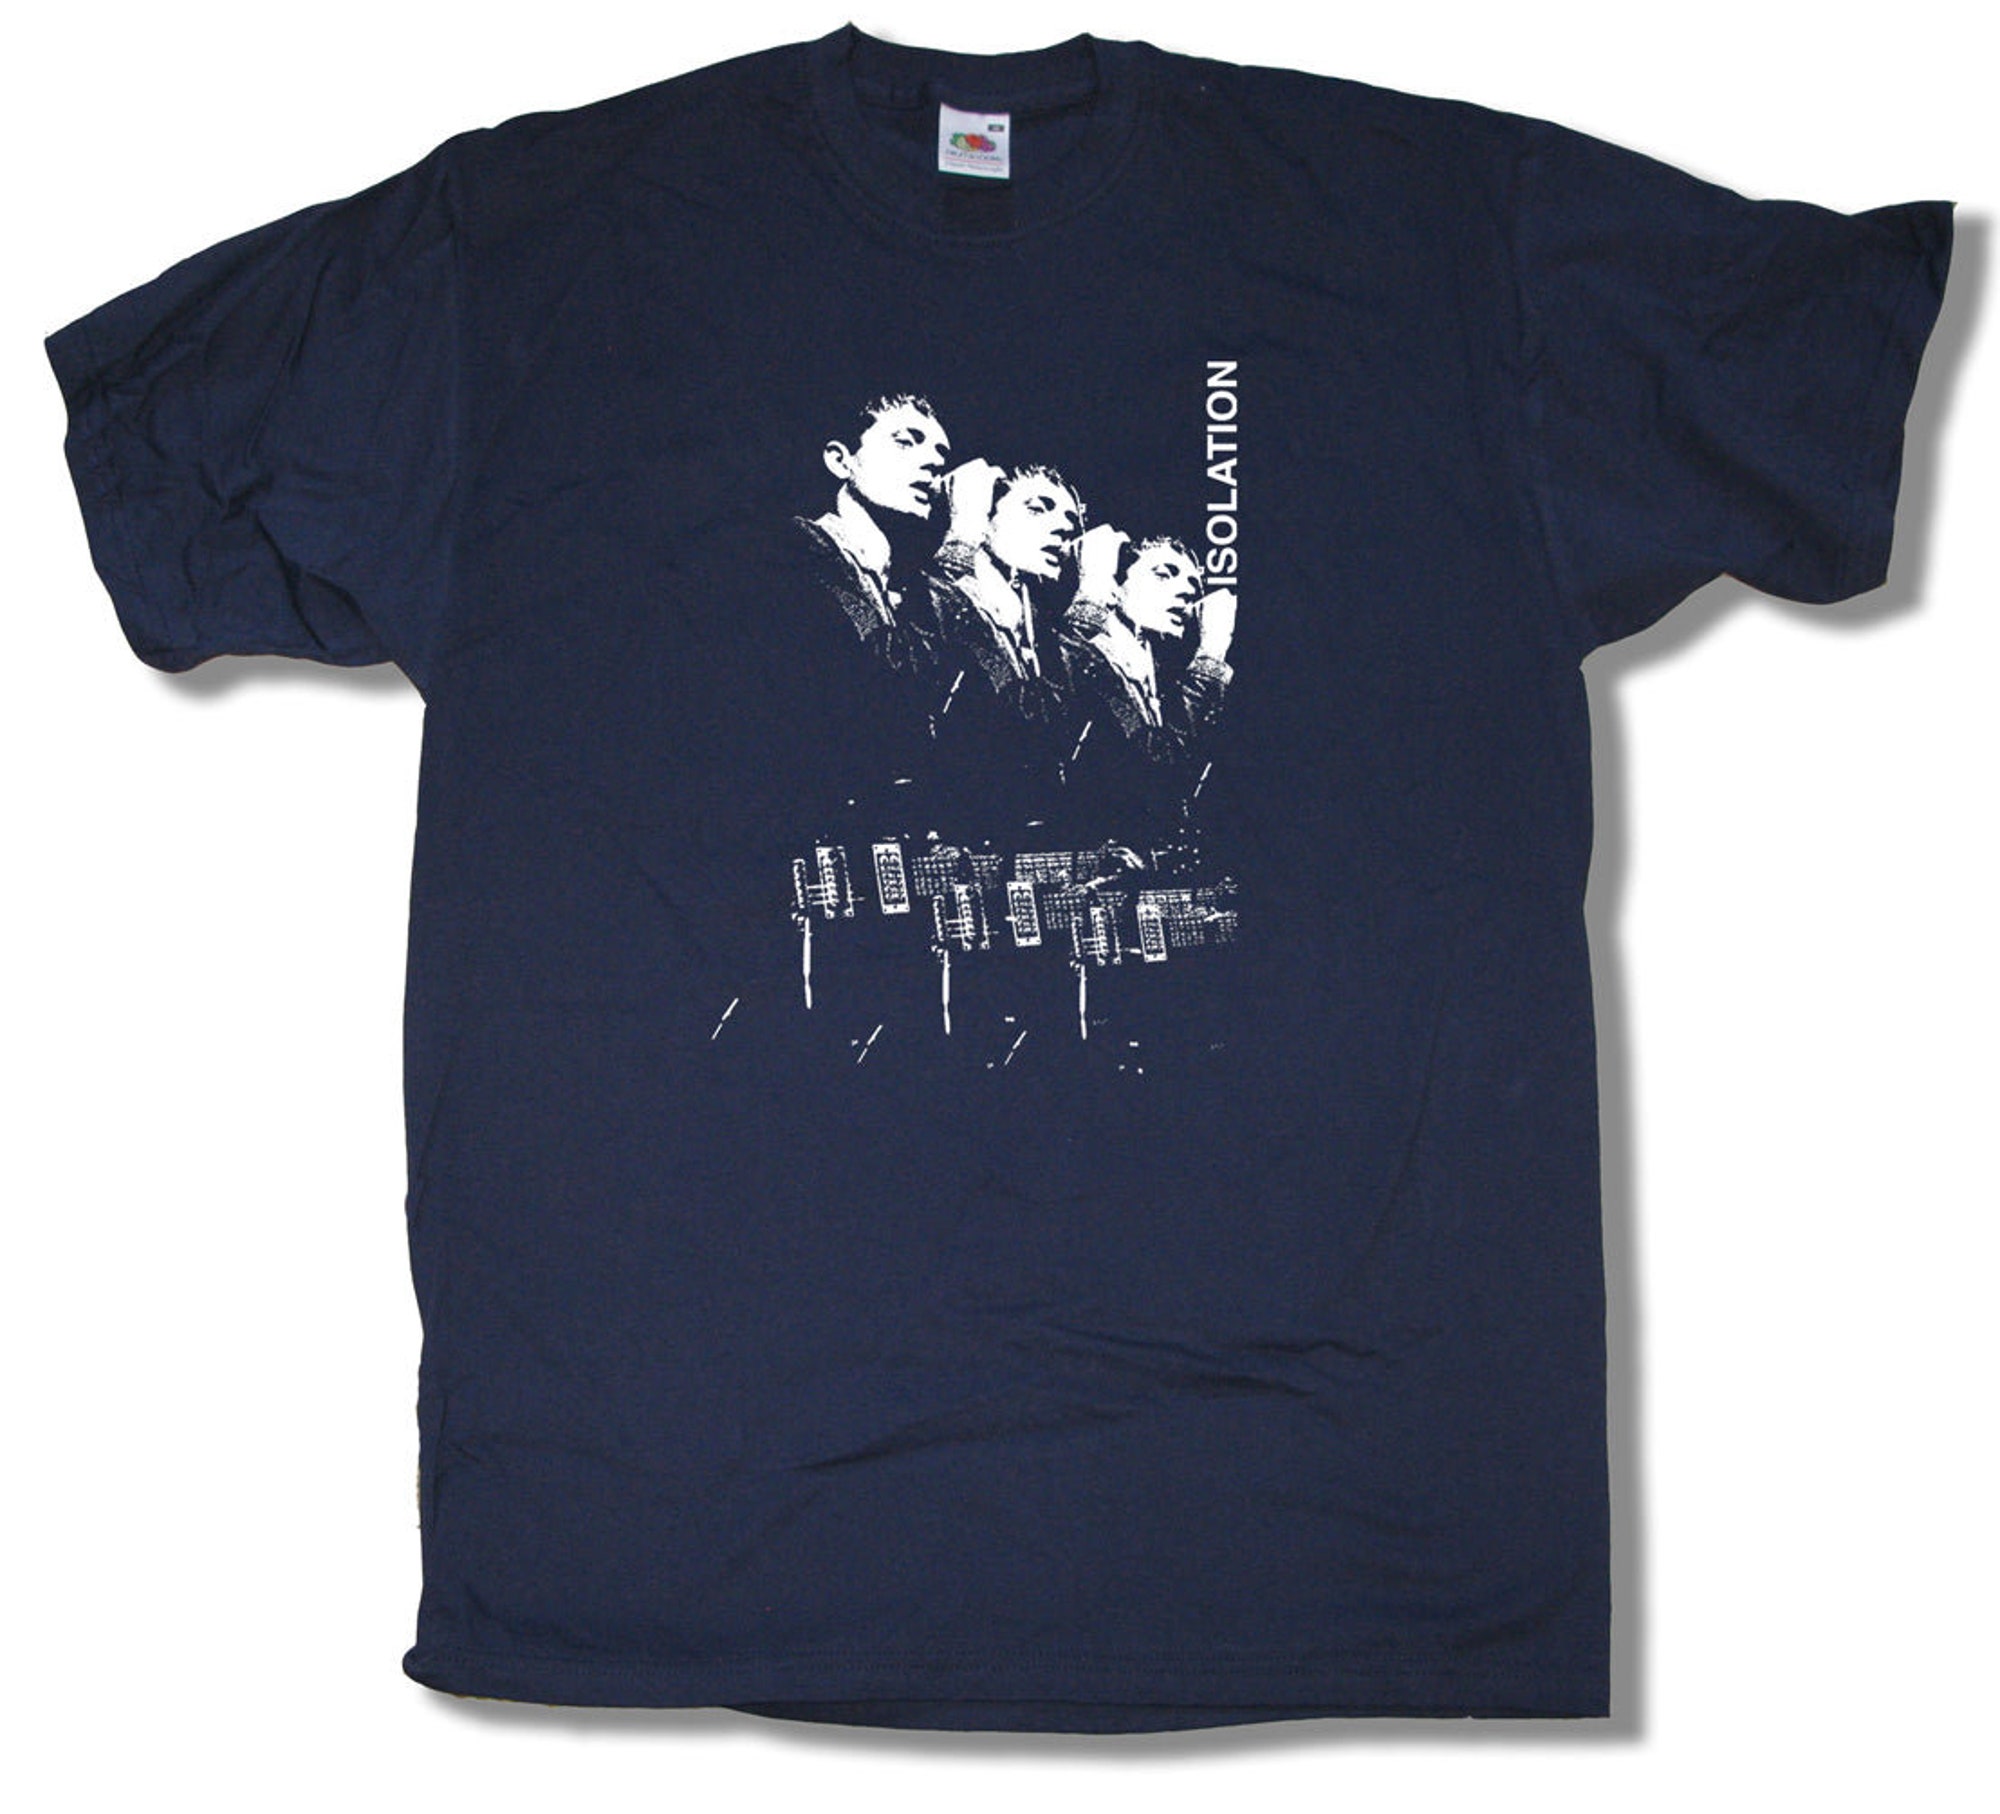 Discover Ian Curtis from Joy Division T shirt - Isolation